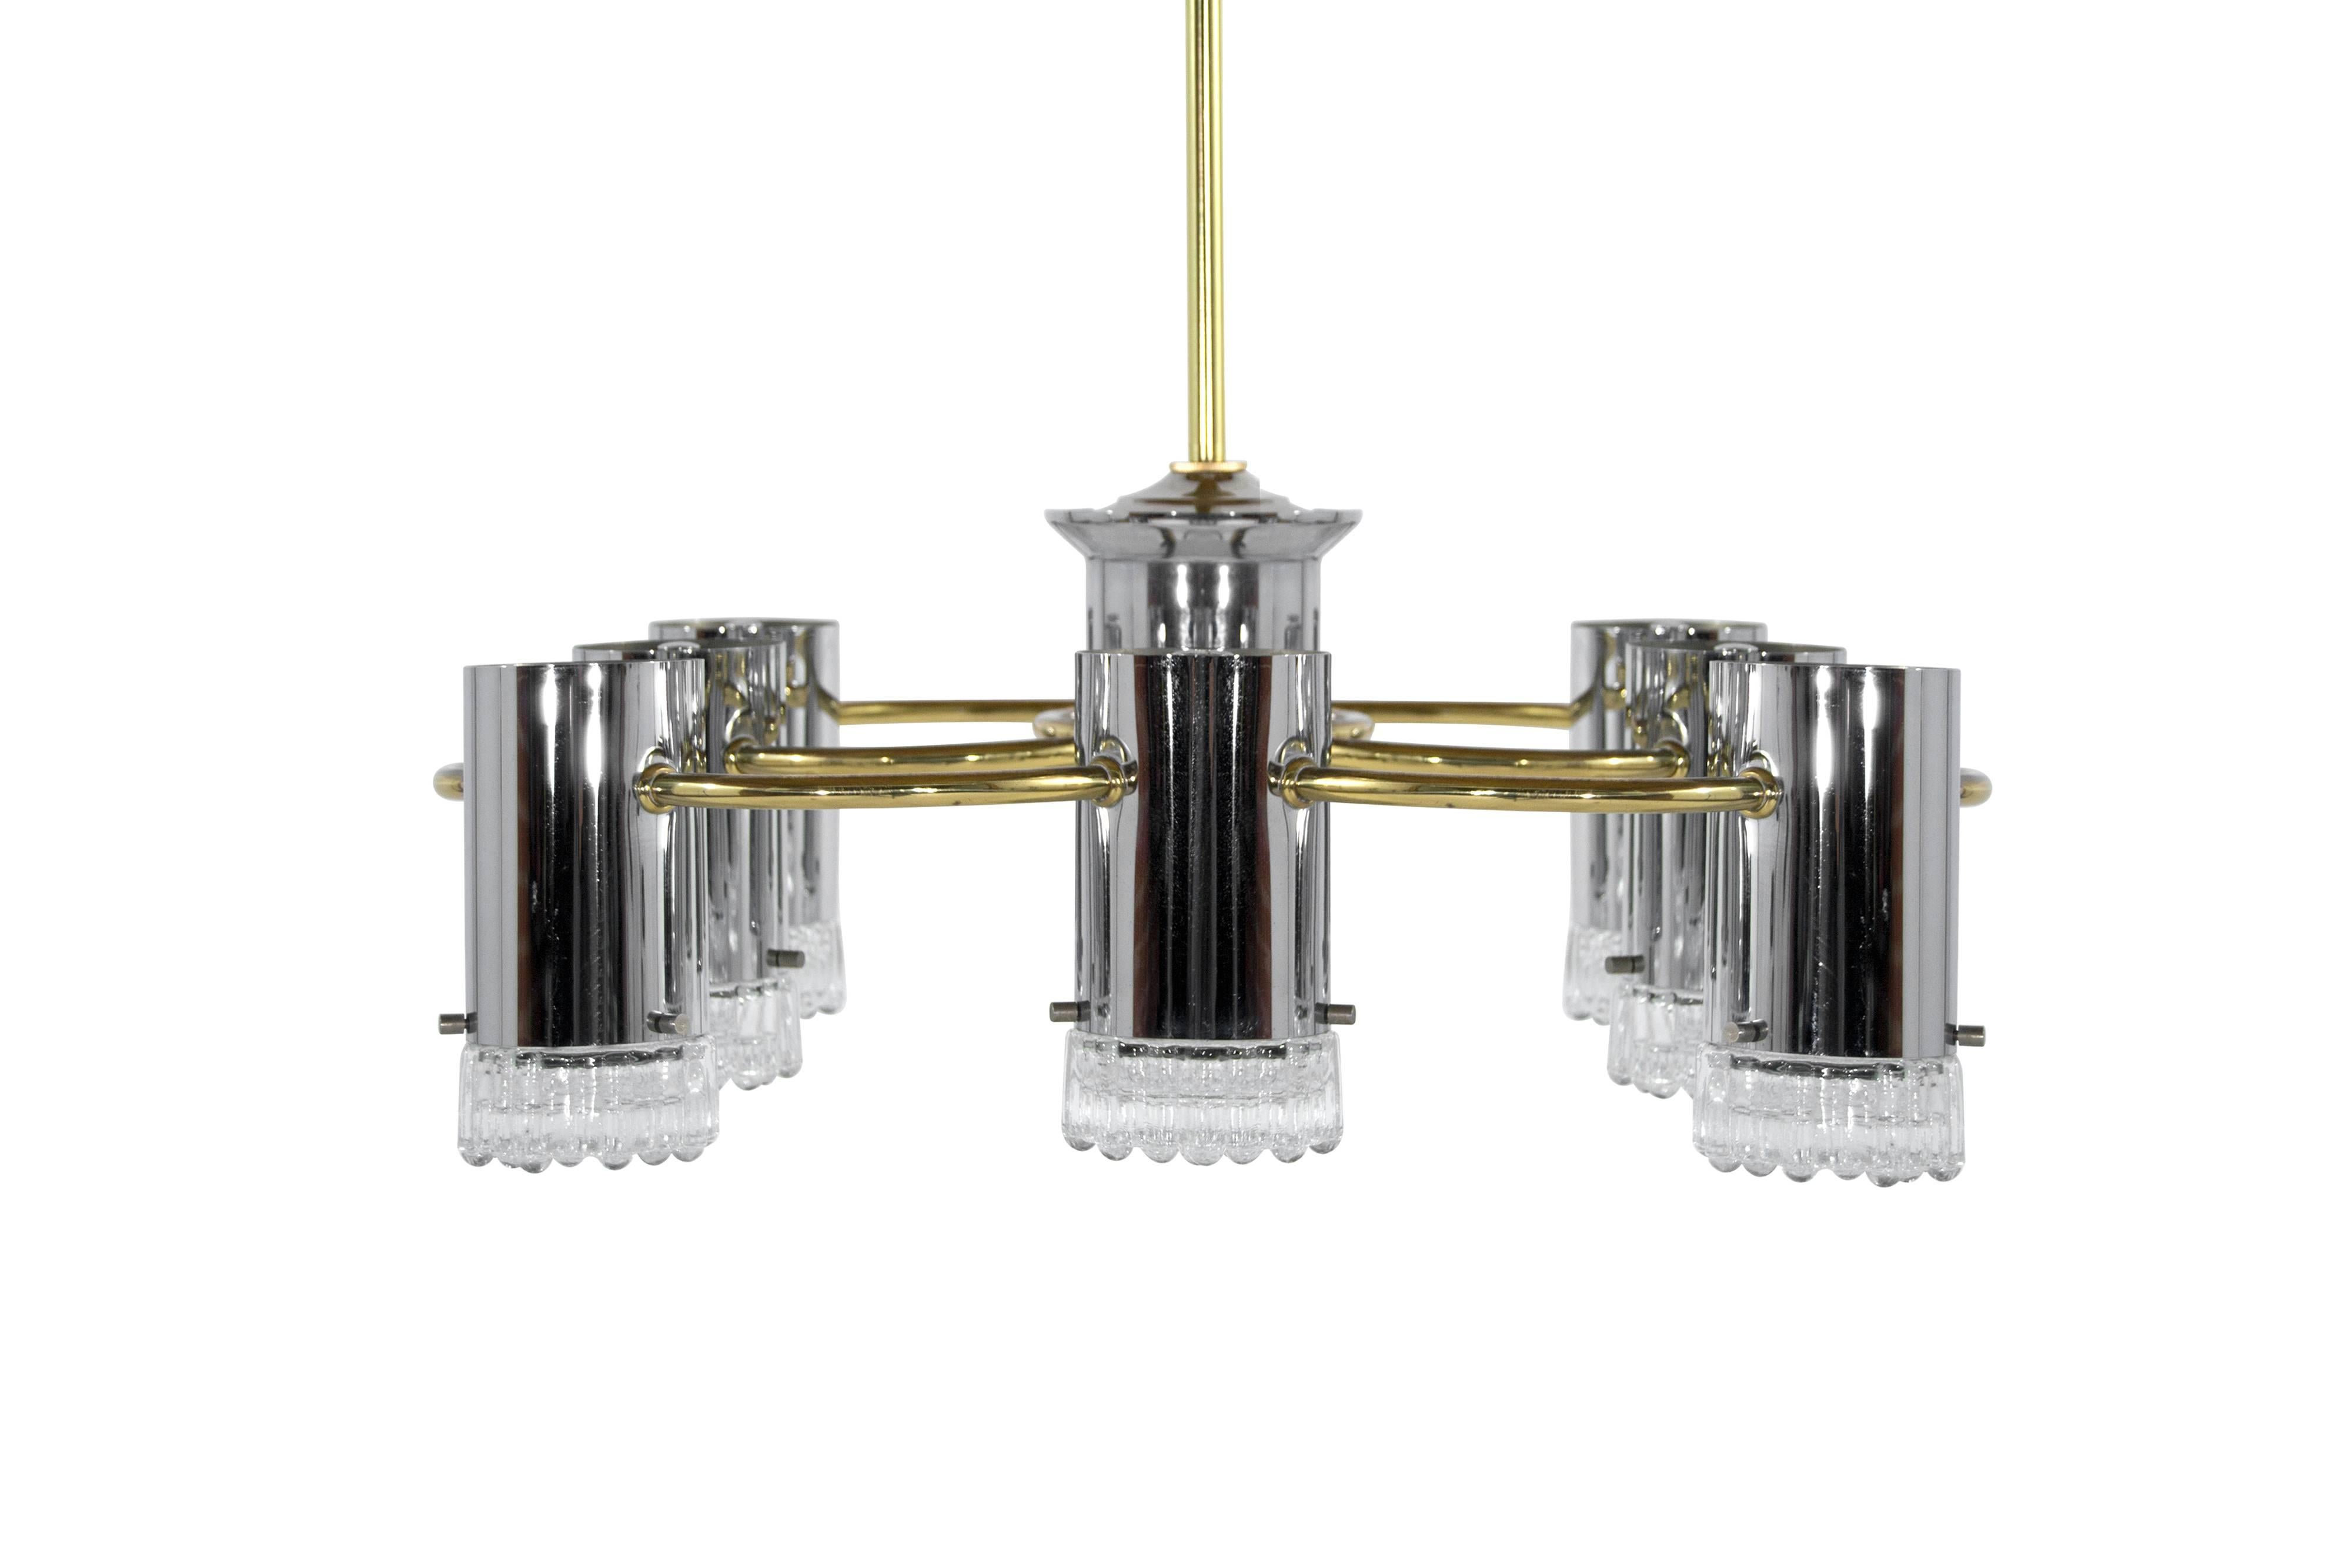 A rare example in chrome and brass by Gaetano Sciolari; manufactured in Italy, circa 1960s. Murano glass shades in excellent condition; this fixture has been fully rewired. Ceiling drop is adjustable. It could also be used as a flush mount fixture.